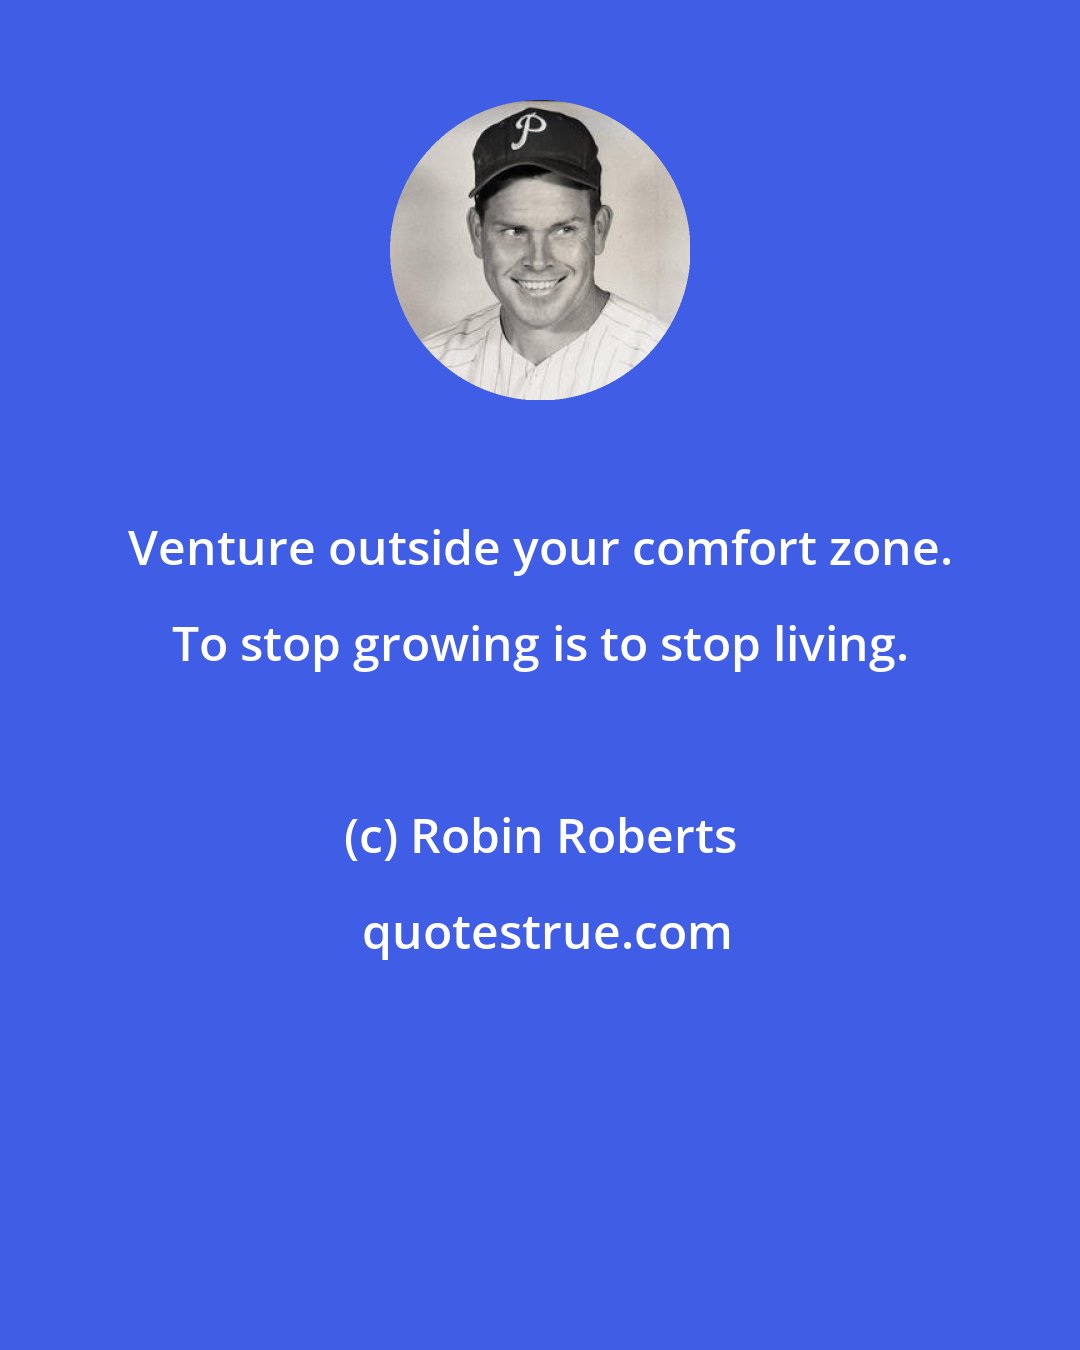 Robin Roberts: Venture outside your comfort zone. To stop growing is to stop living.